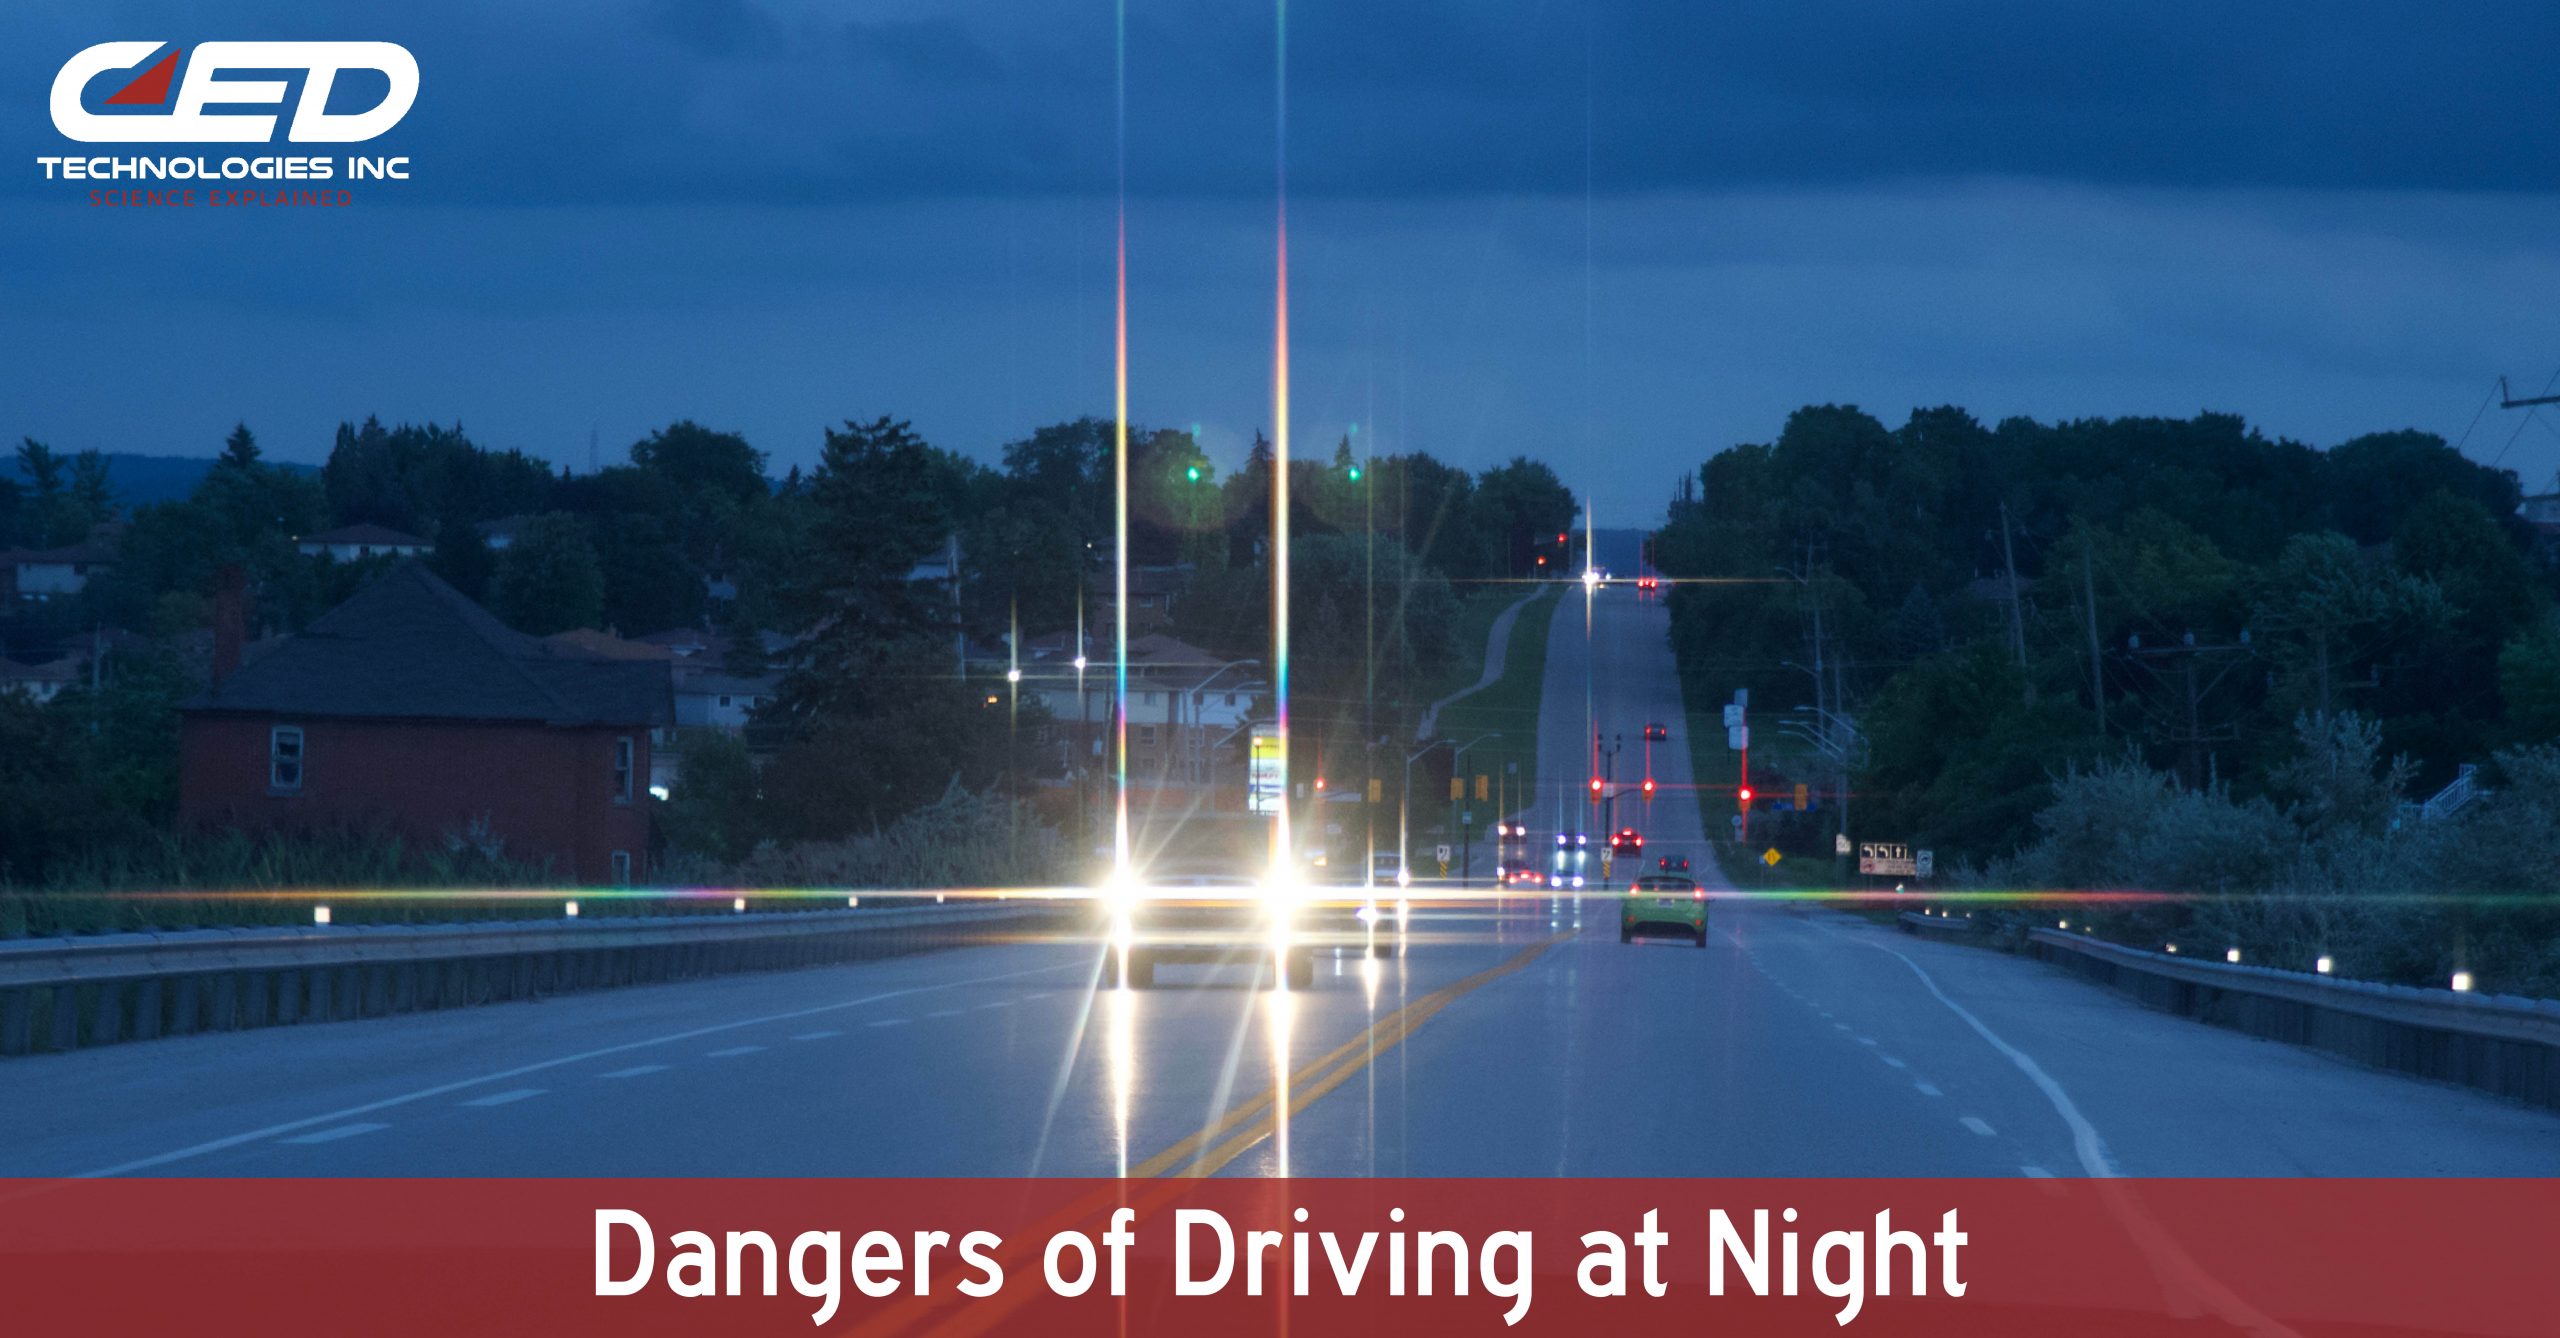 Nighttime is the Most Dangerous Time to Drive